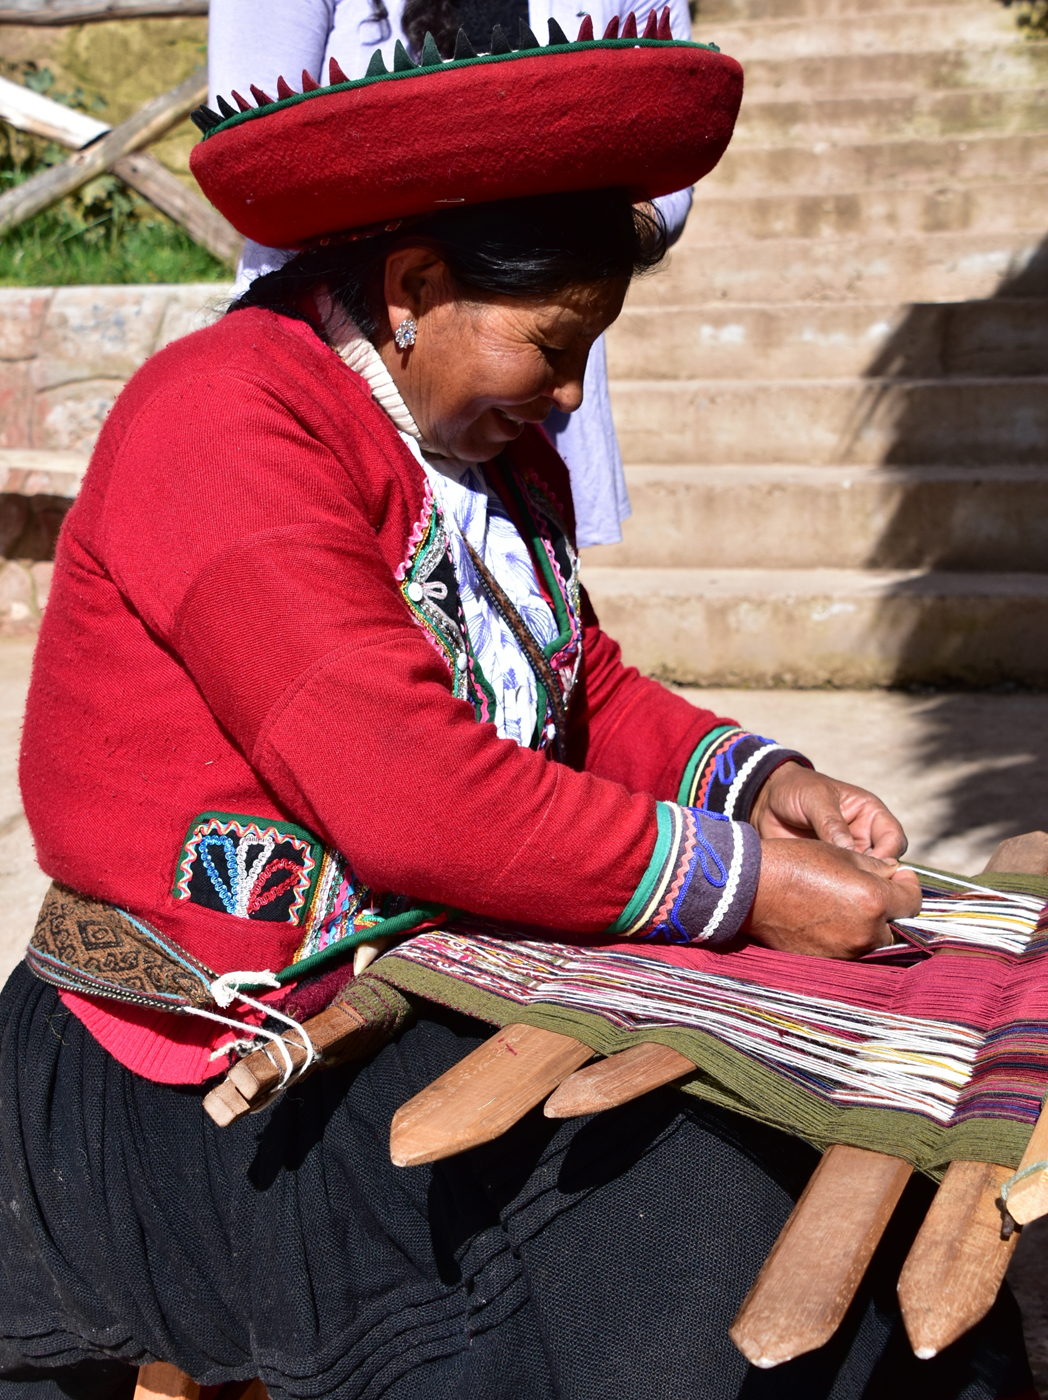 Indigenous Peruvian woman from the Chinchero District in the Andes Mountains demonstrating traditional weaving using locally produced and dyed wool. March 2016. Photograph by Robert R. Oxborrow.